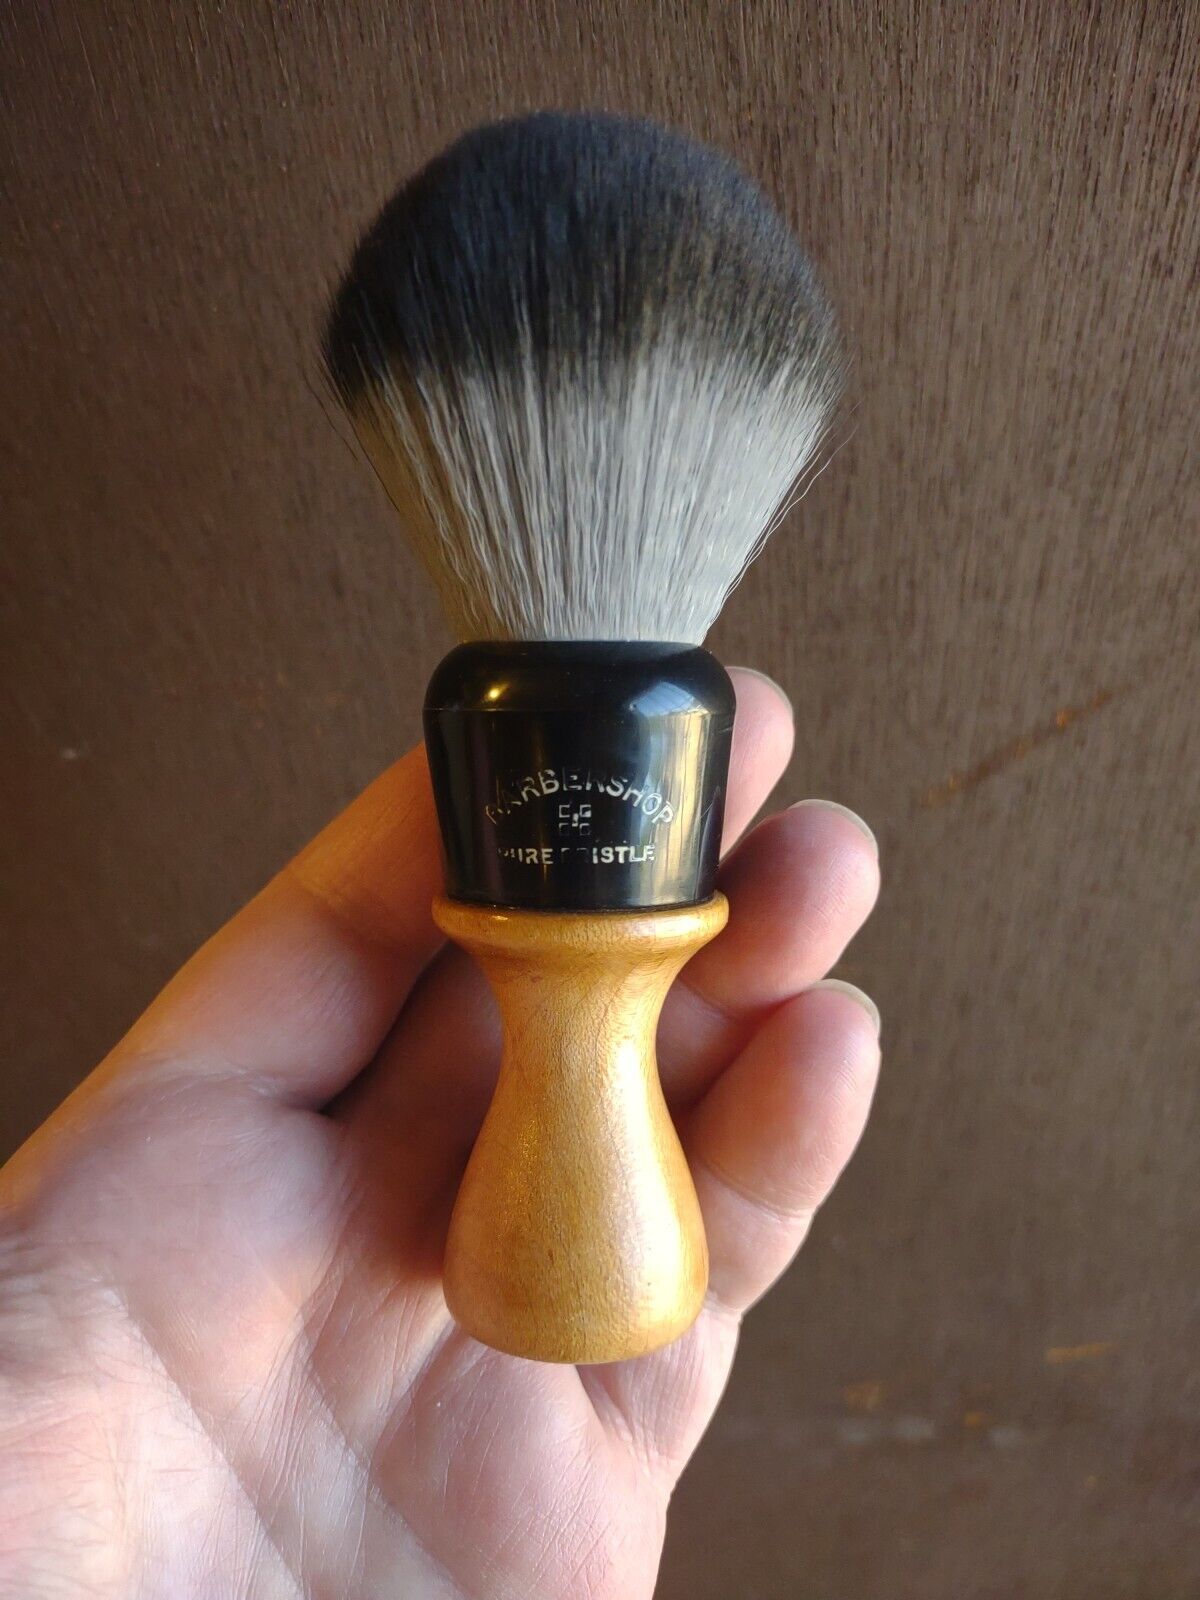 Vintage Barbershop Shave Brush New 26mm Maggard Razors Timber wolf Knot